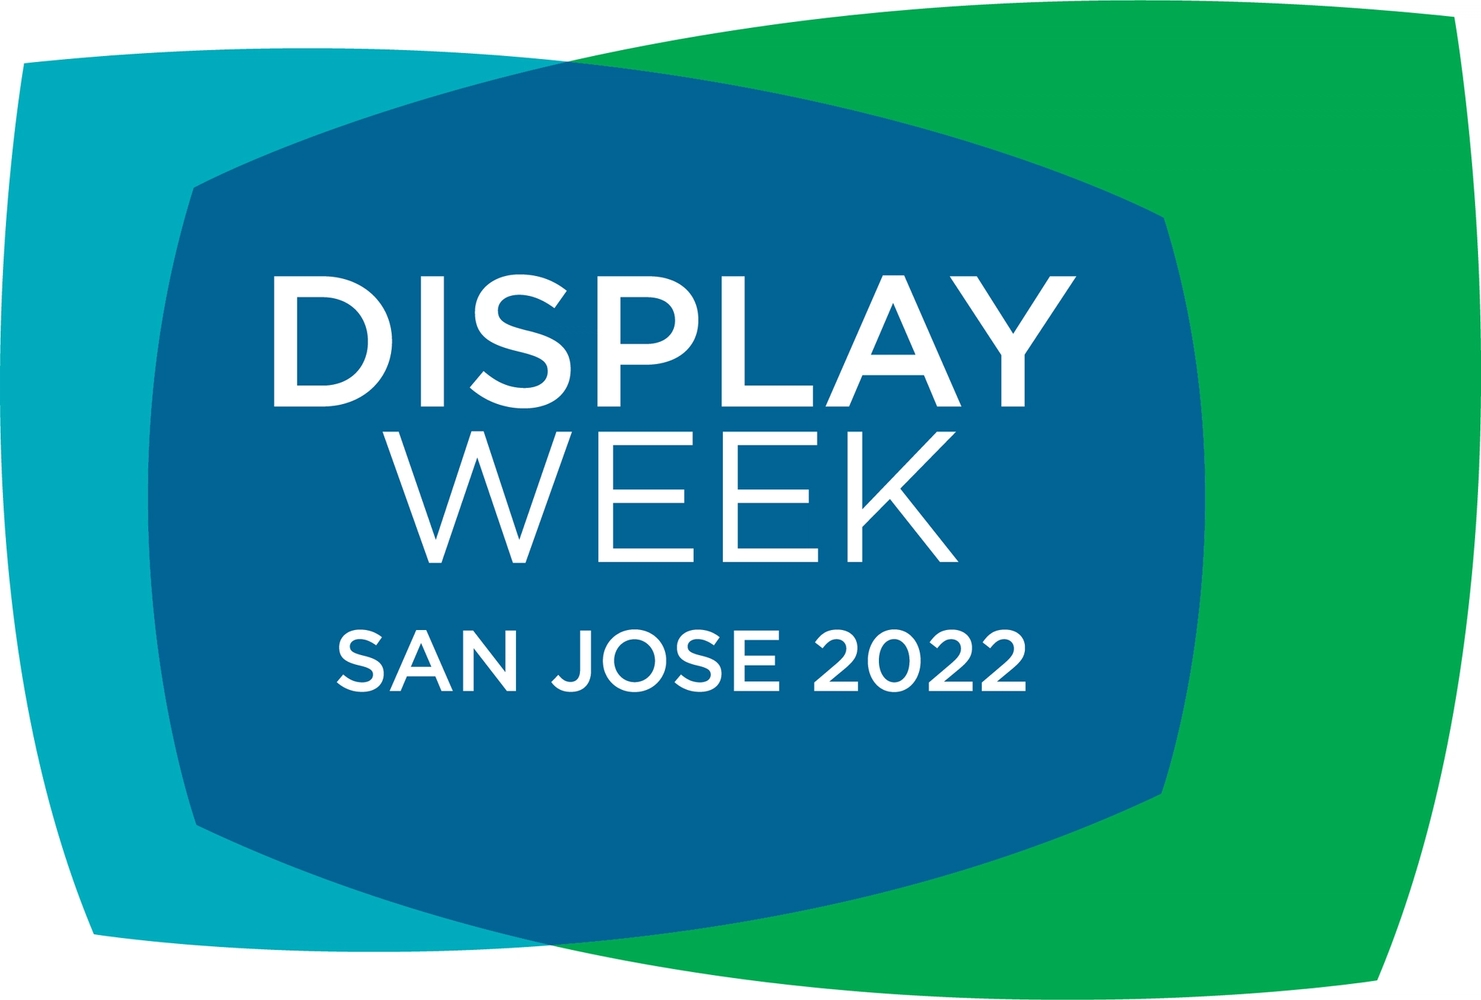 DisplayWeek Logo - eLstar Dynamics will be exhibiting at the event.